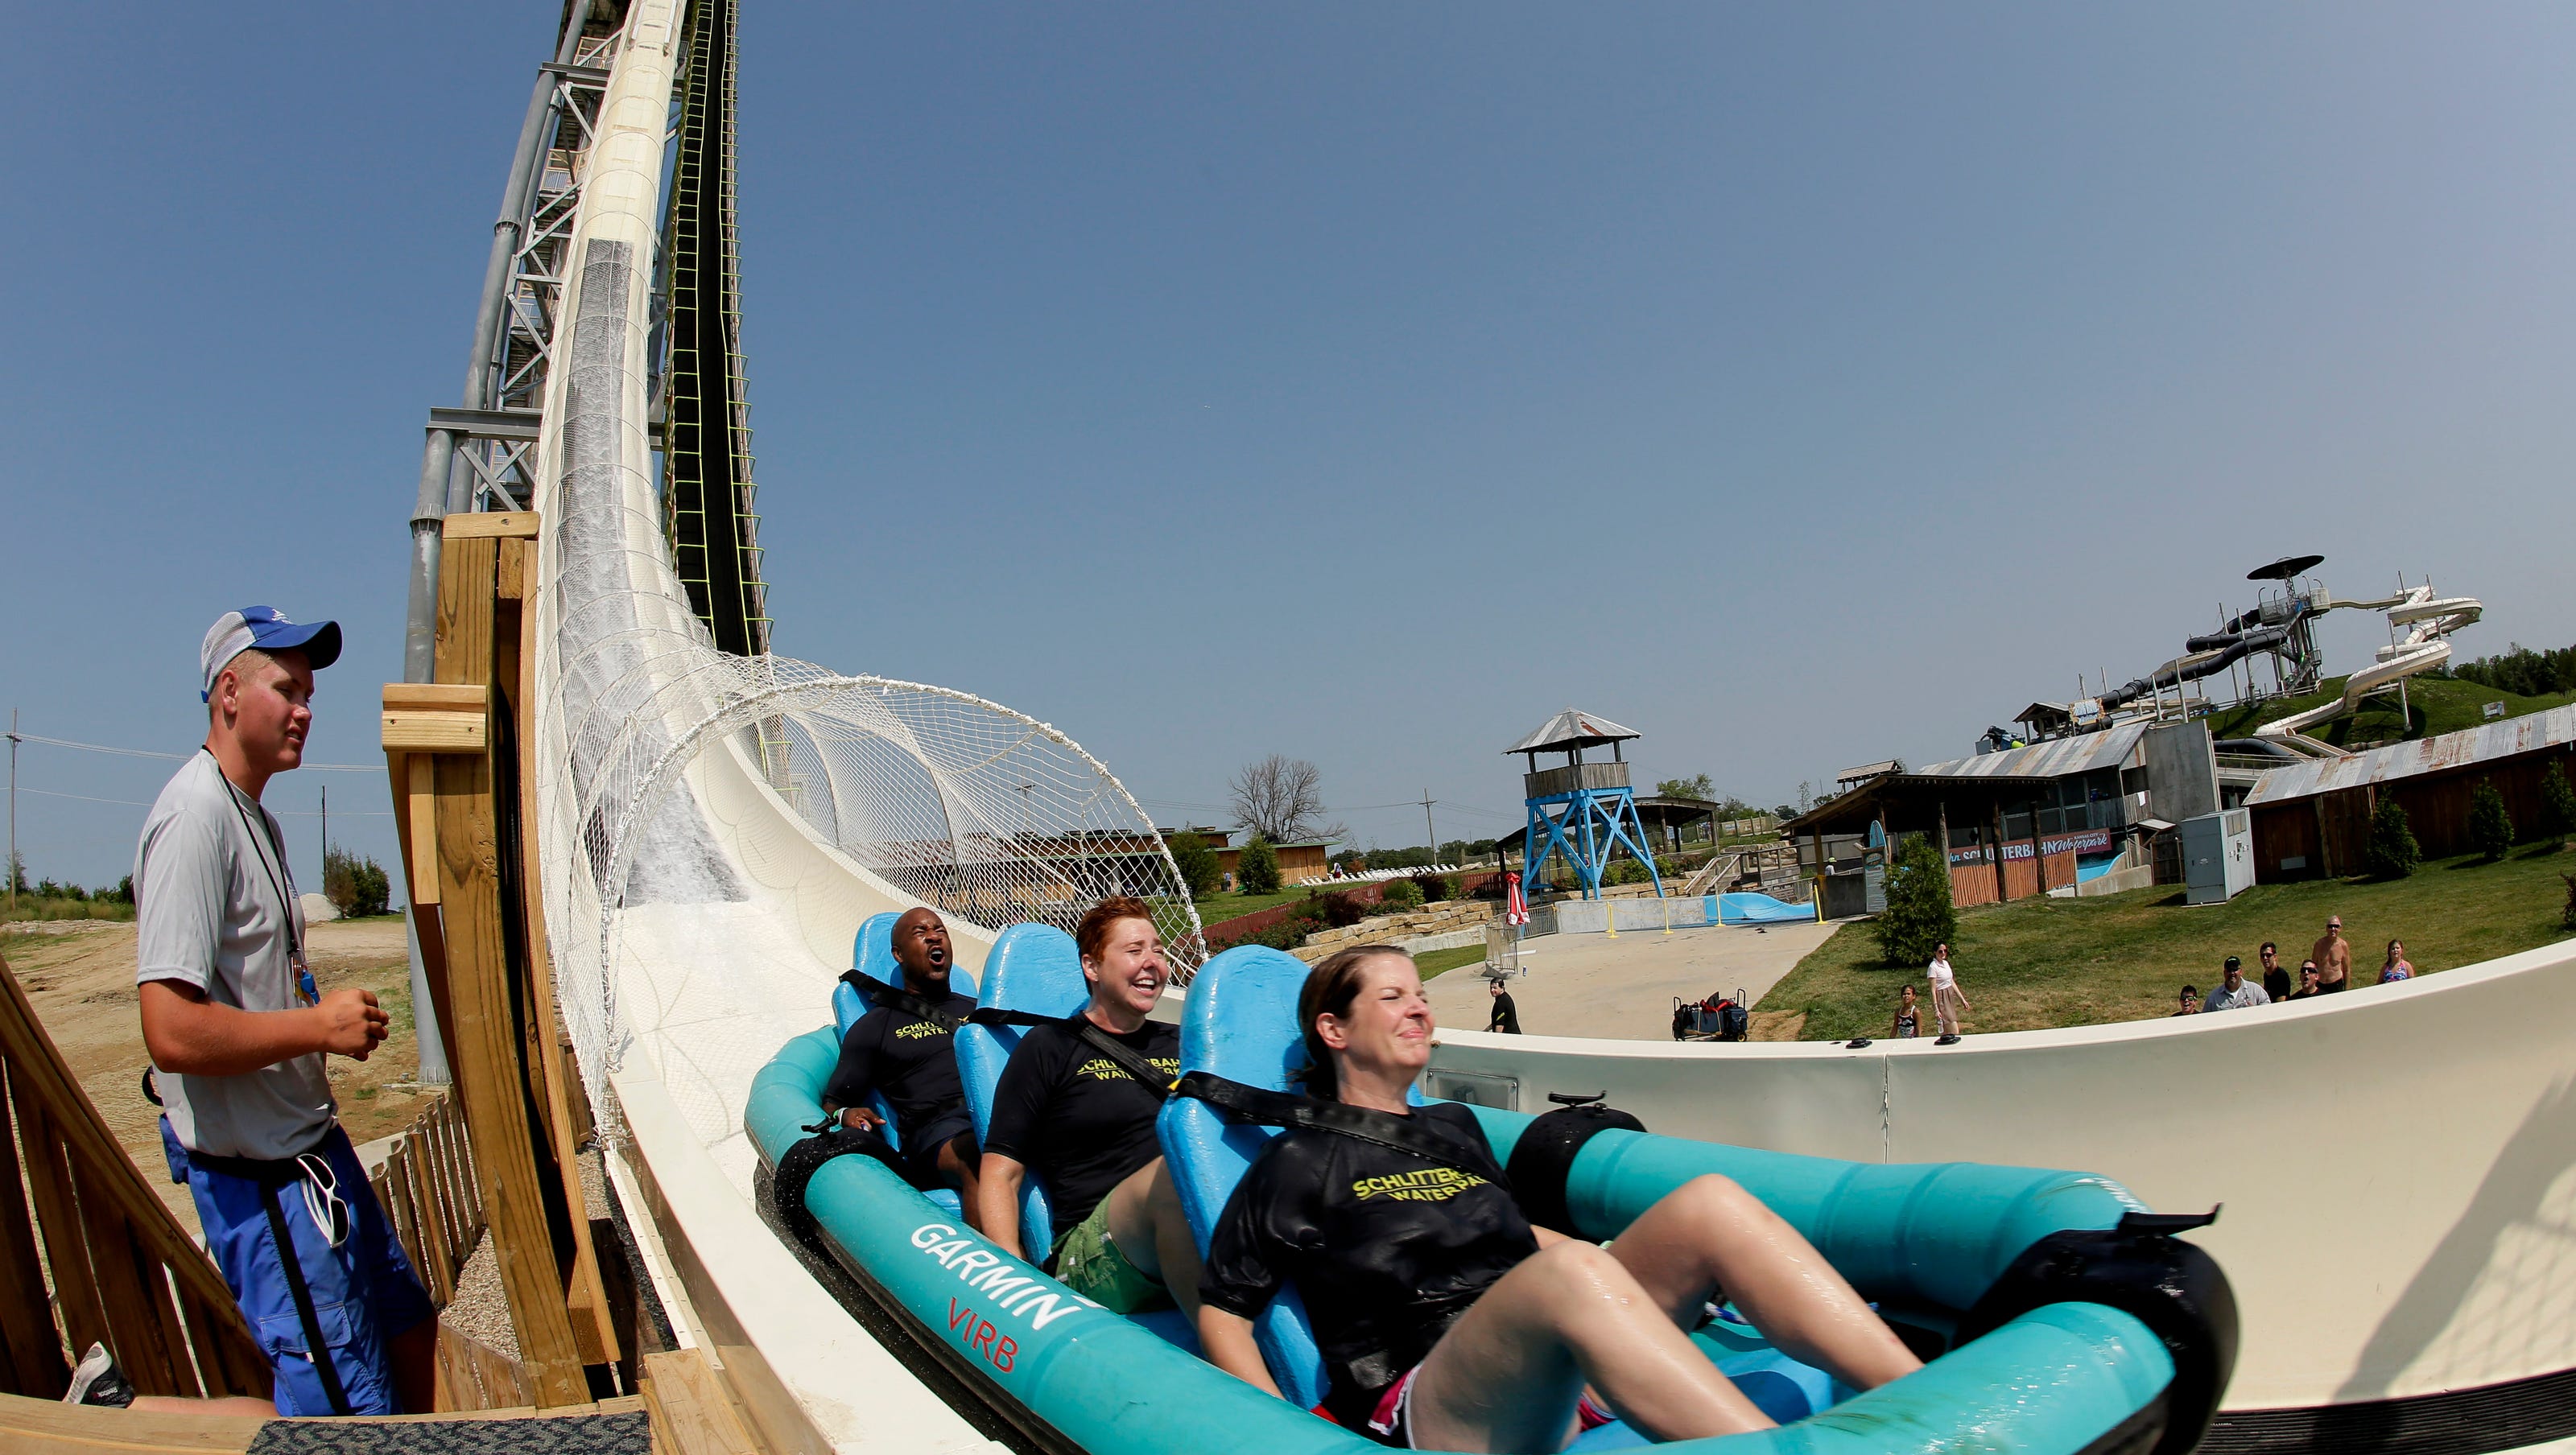 A 10-year-old boy killed while riding a giant Kansas water slide on Sunday ...